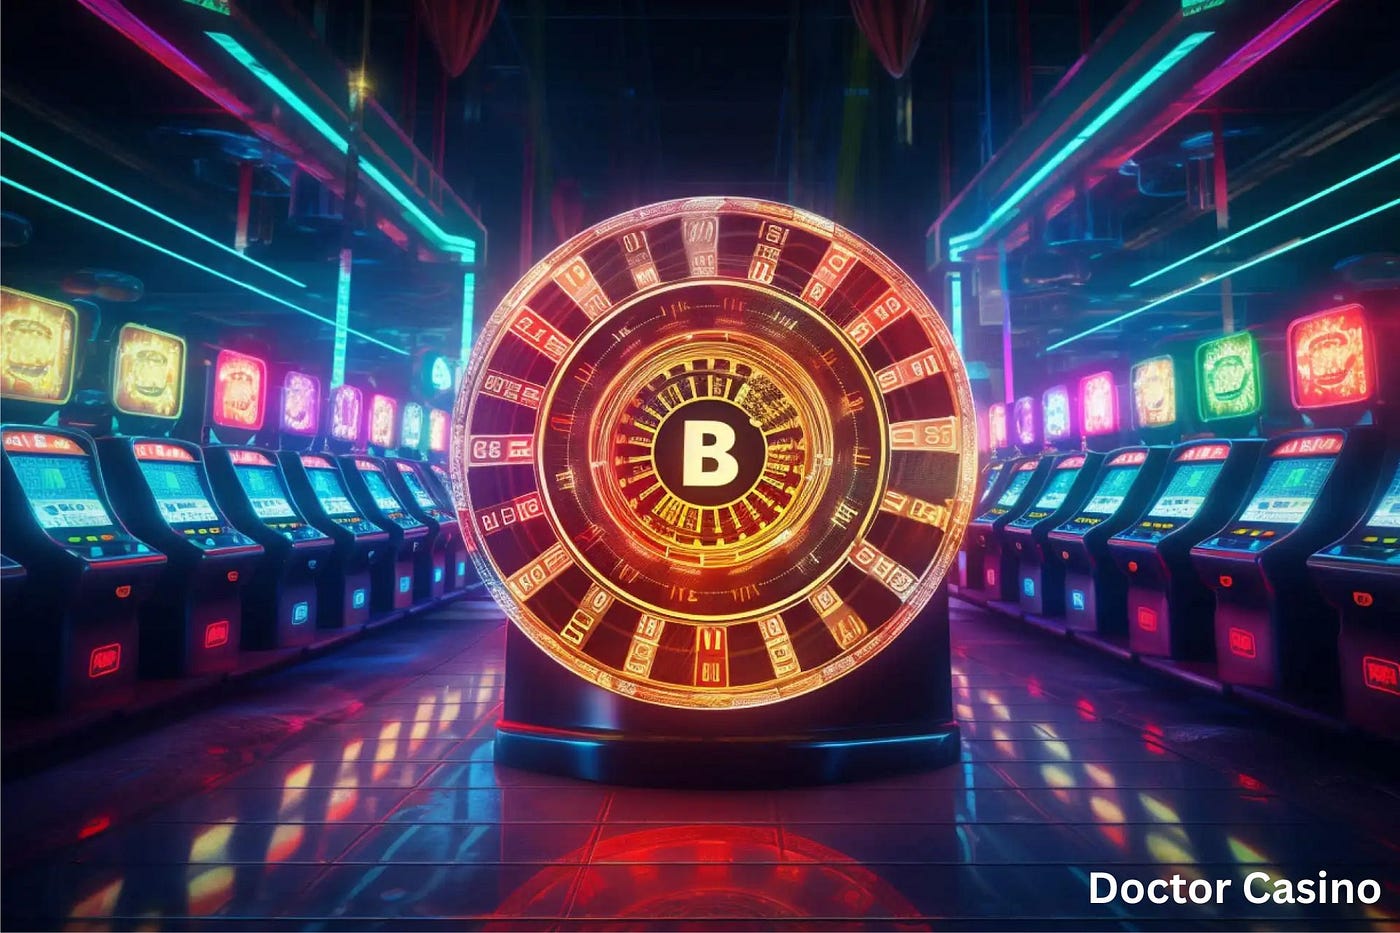 9 Easy Ways To BC Game Crypto Casino: A New Era of Digital Gaming Without Even Thinking About It